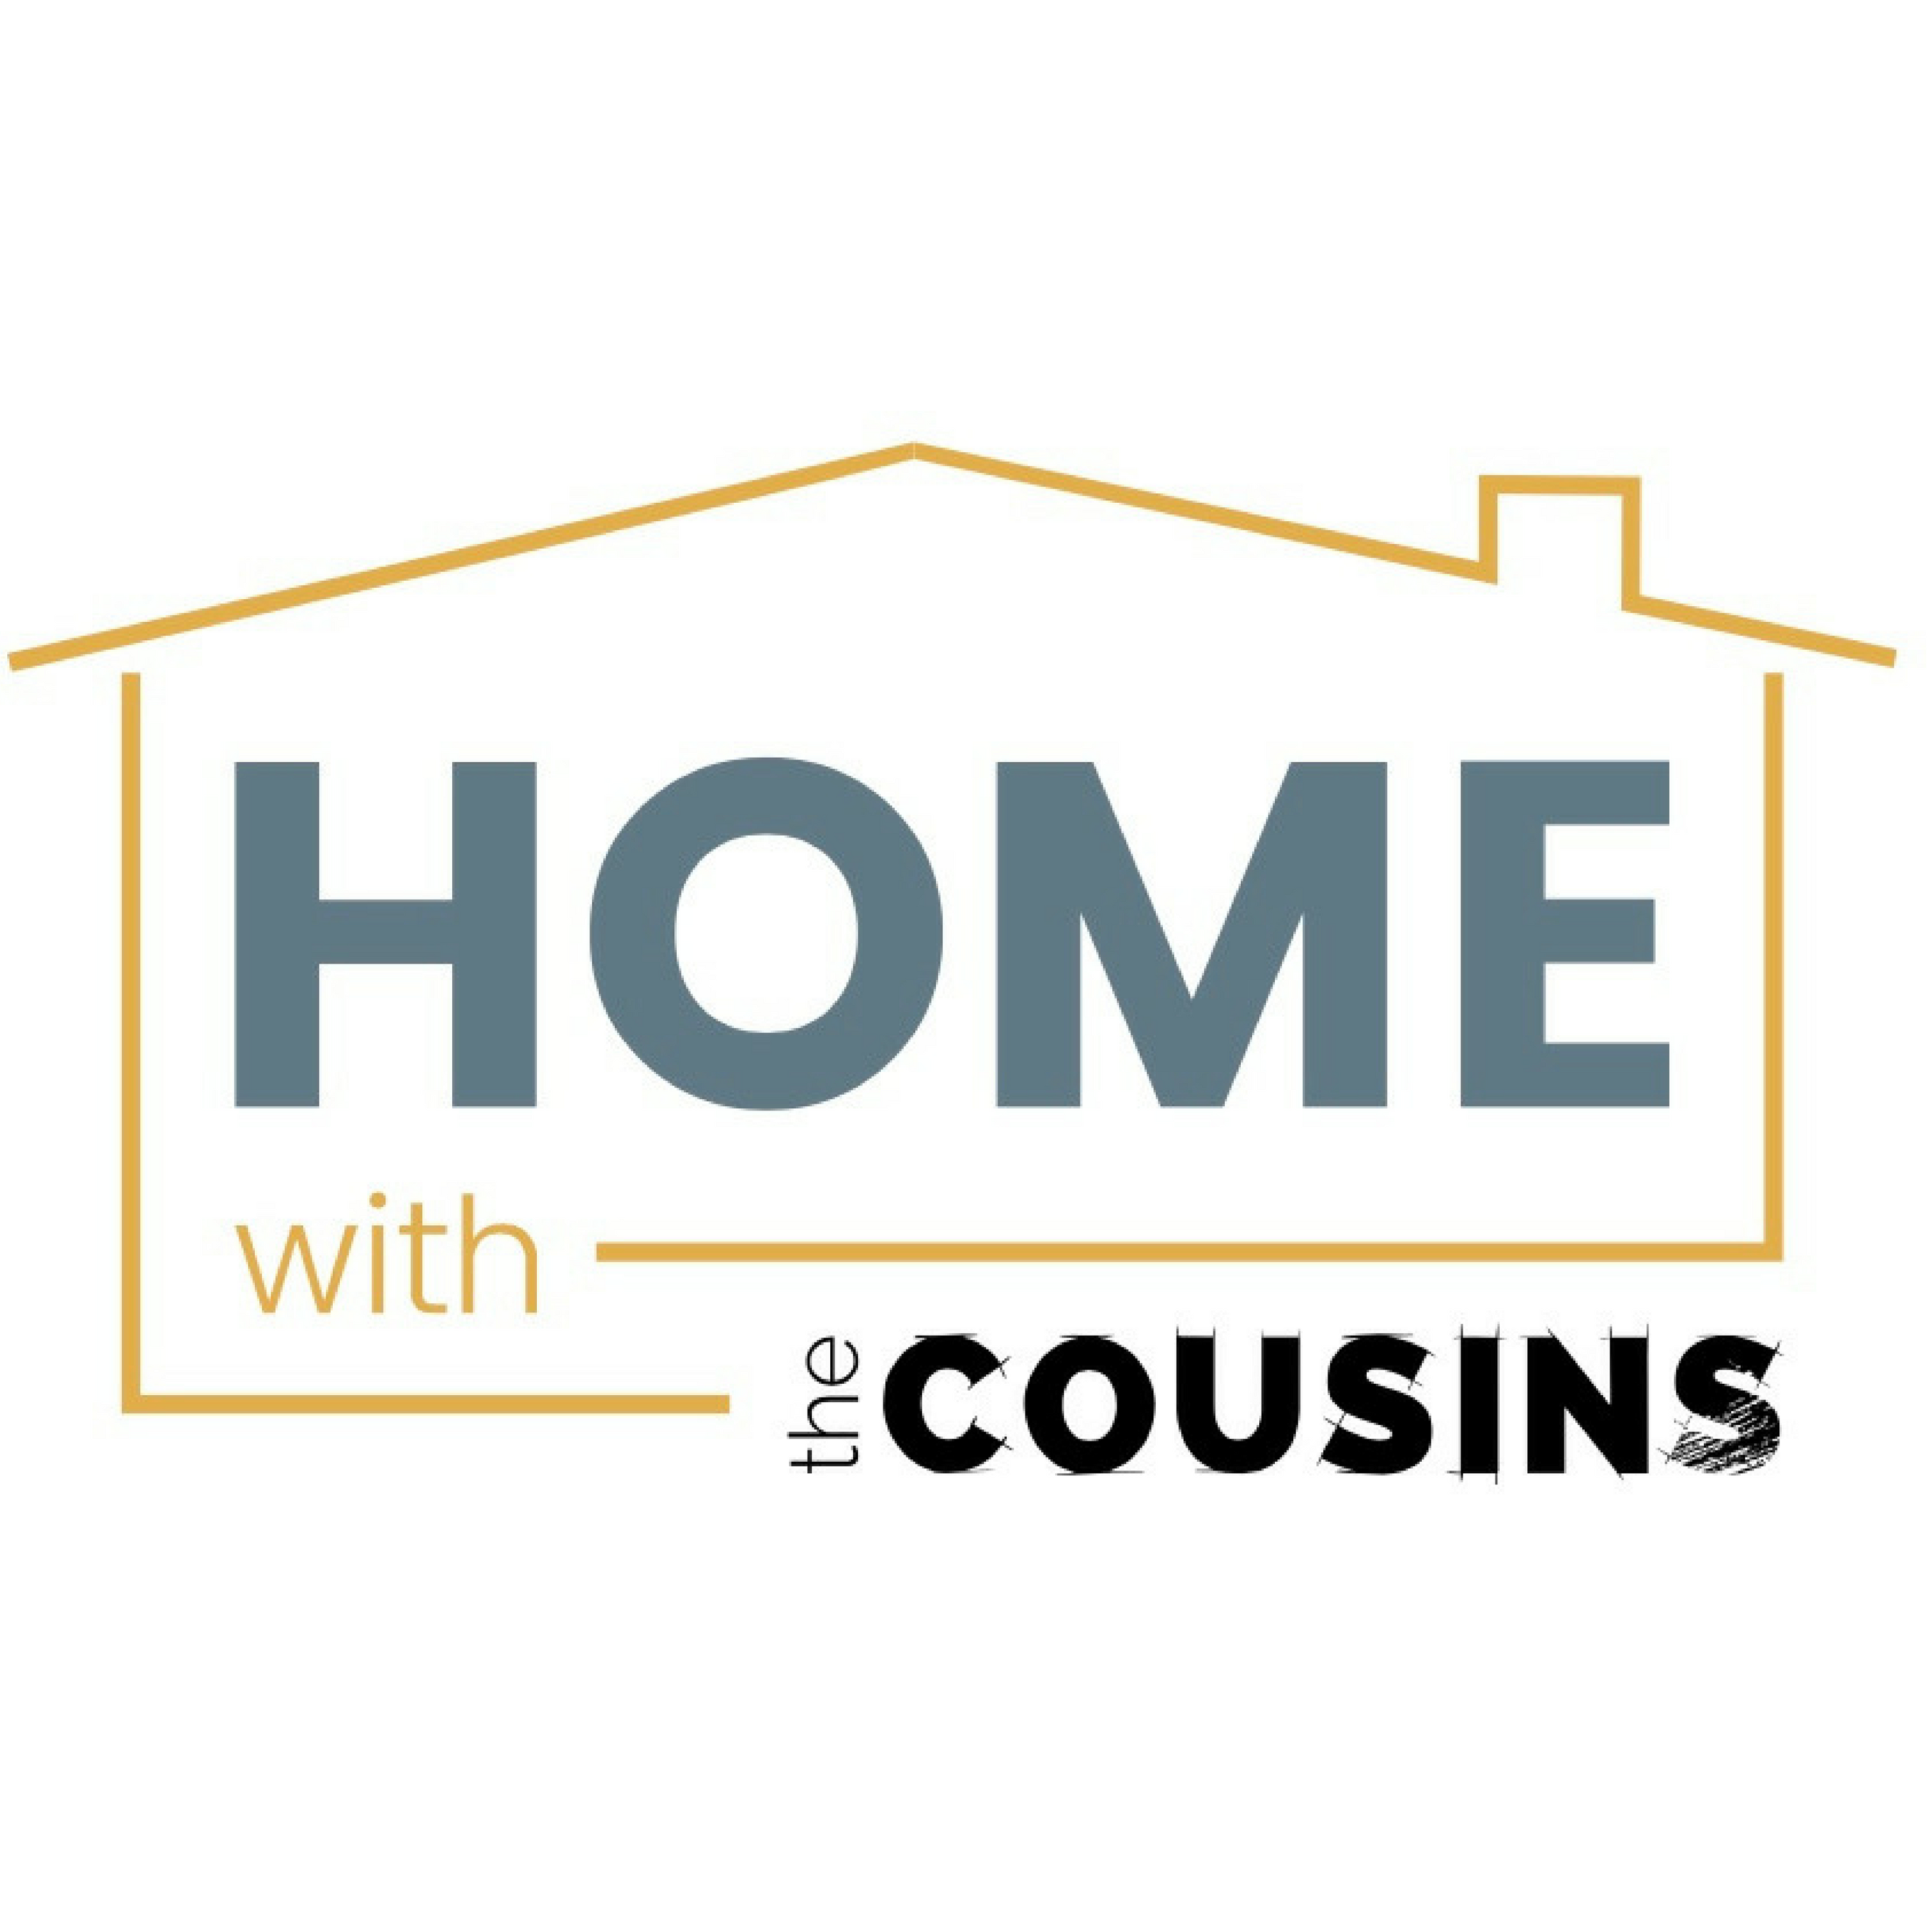 Podcast: Home with the Cousins